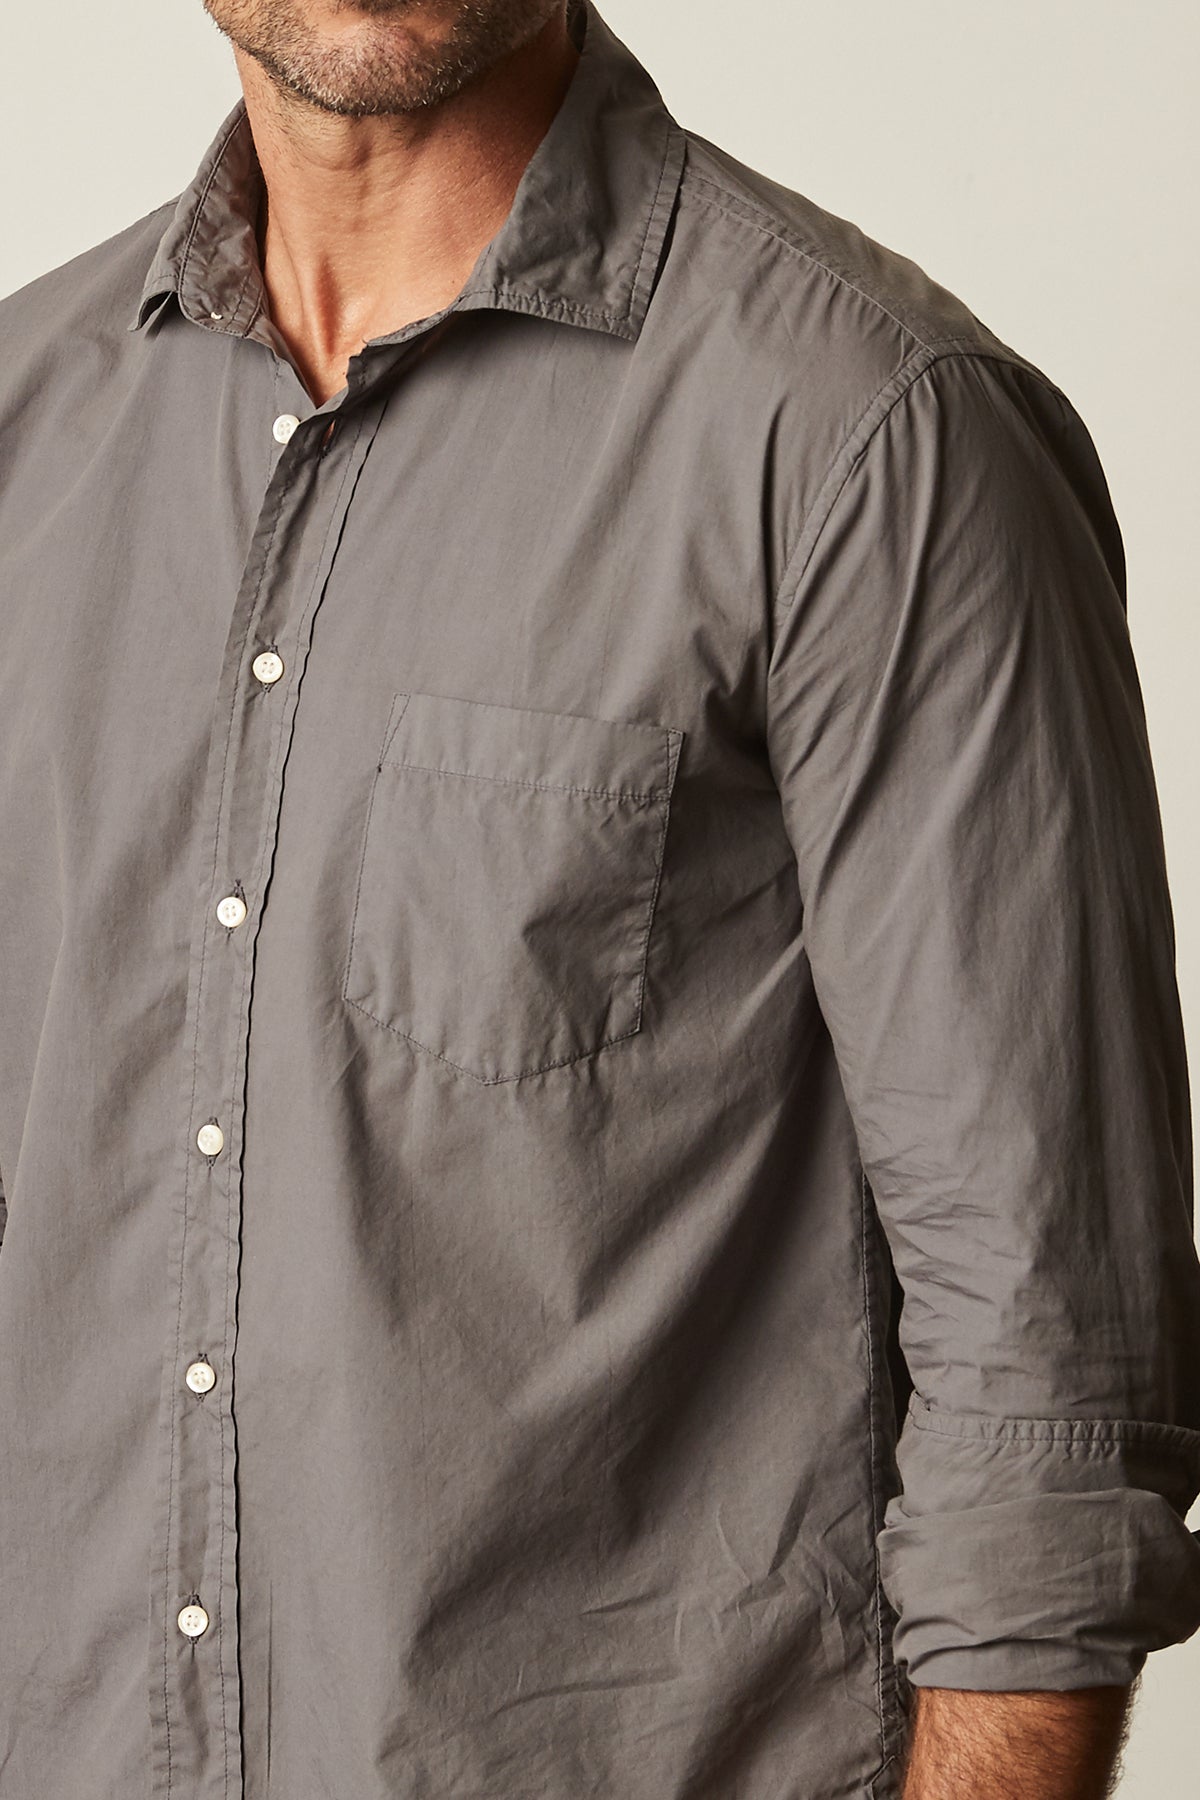 Brooks button up woven shirt in carbon front detail-24983593287873